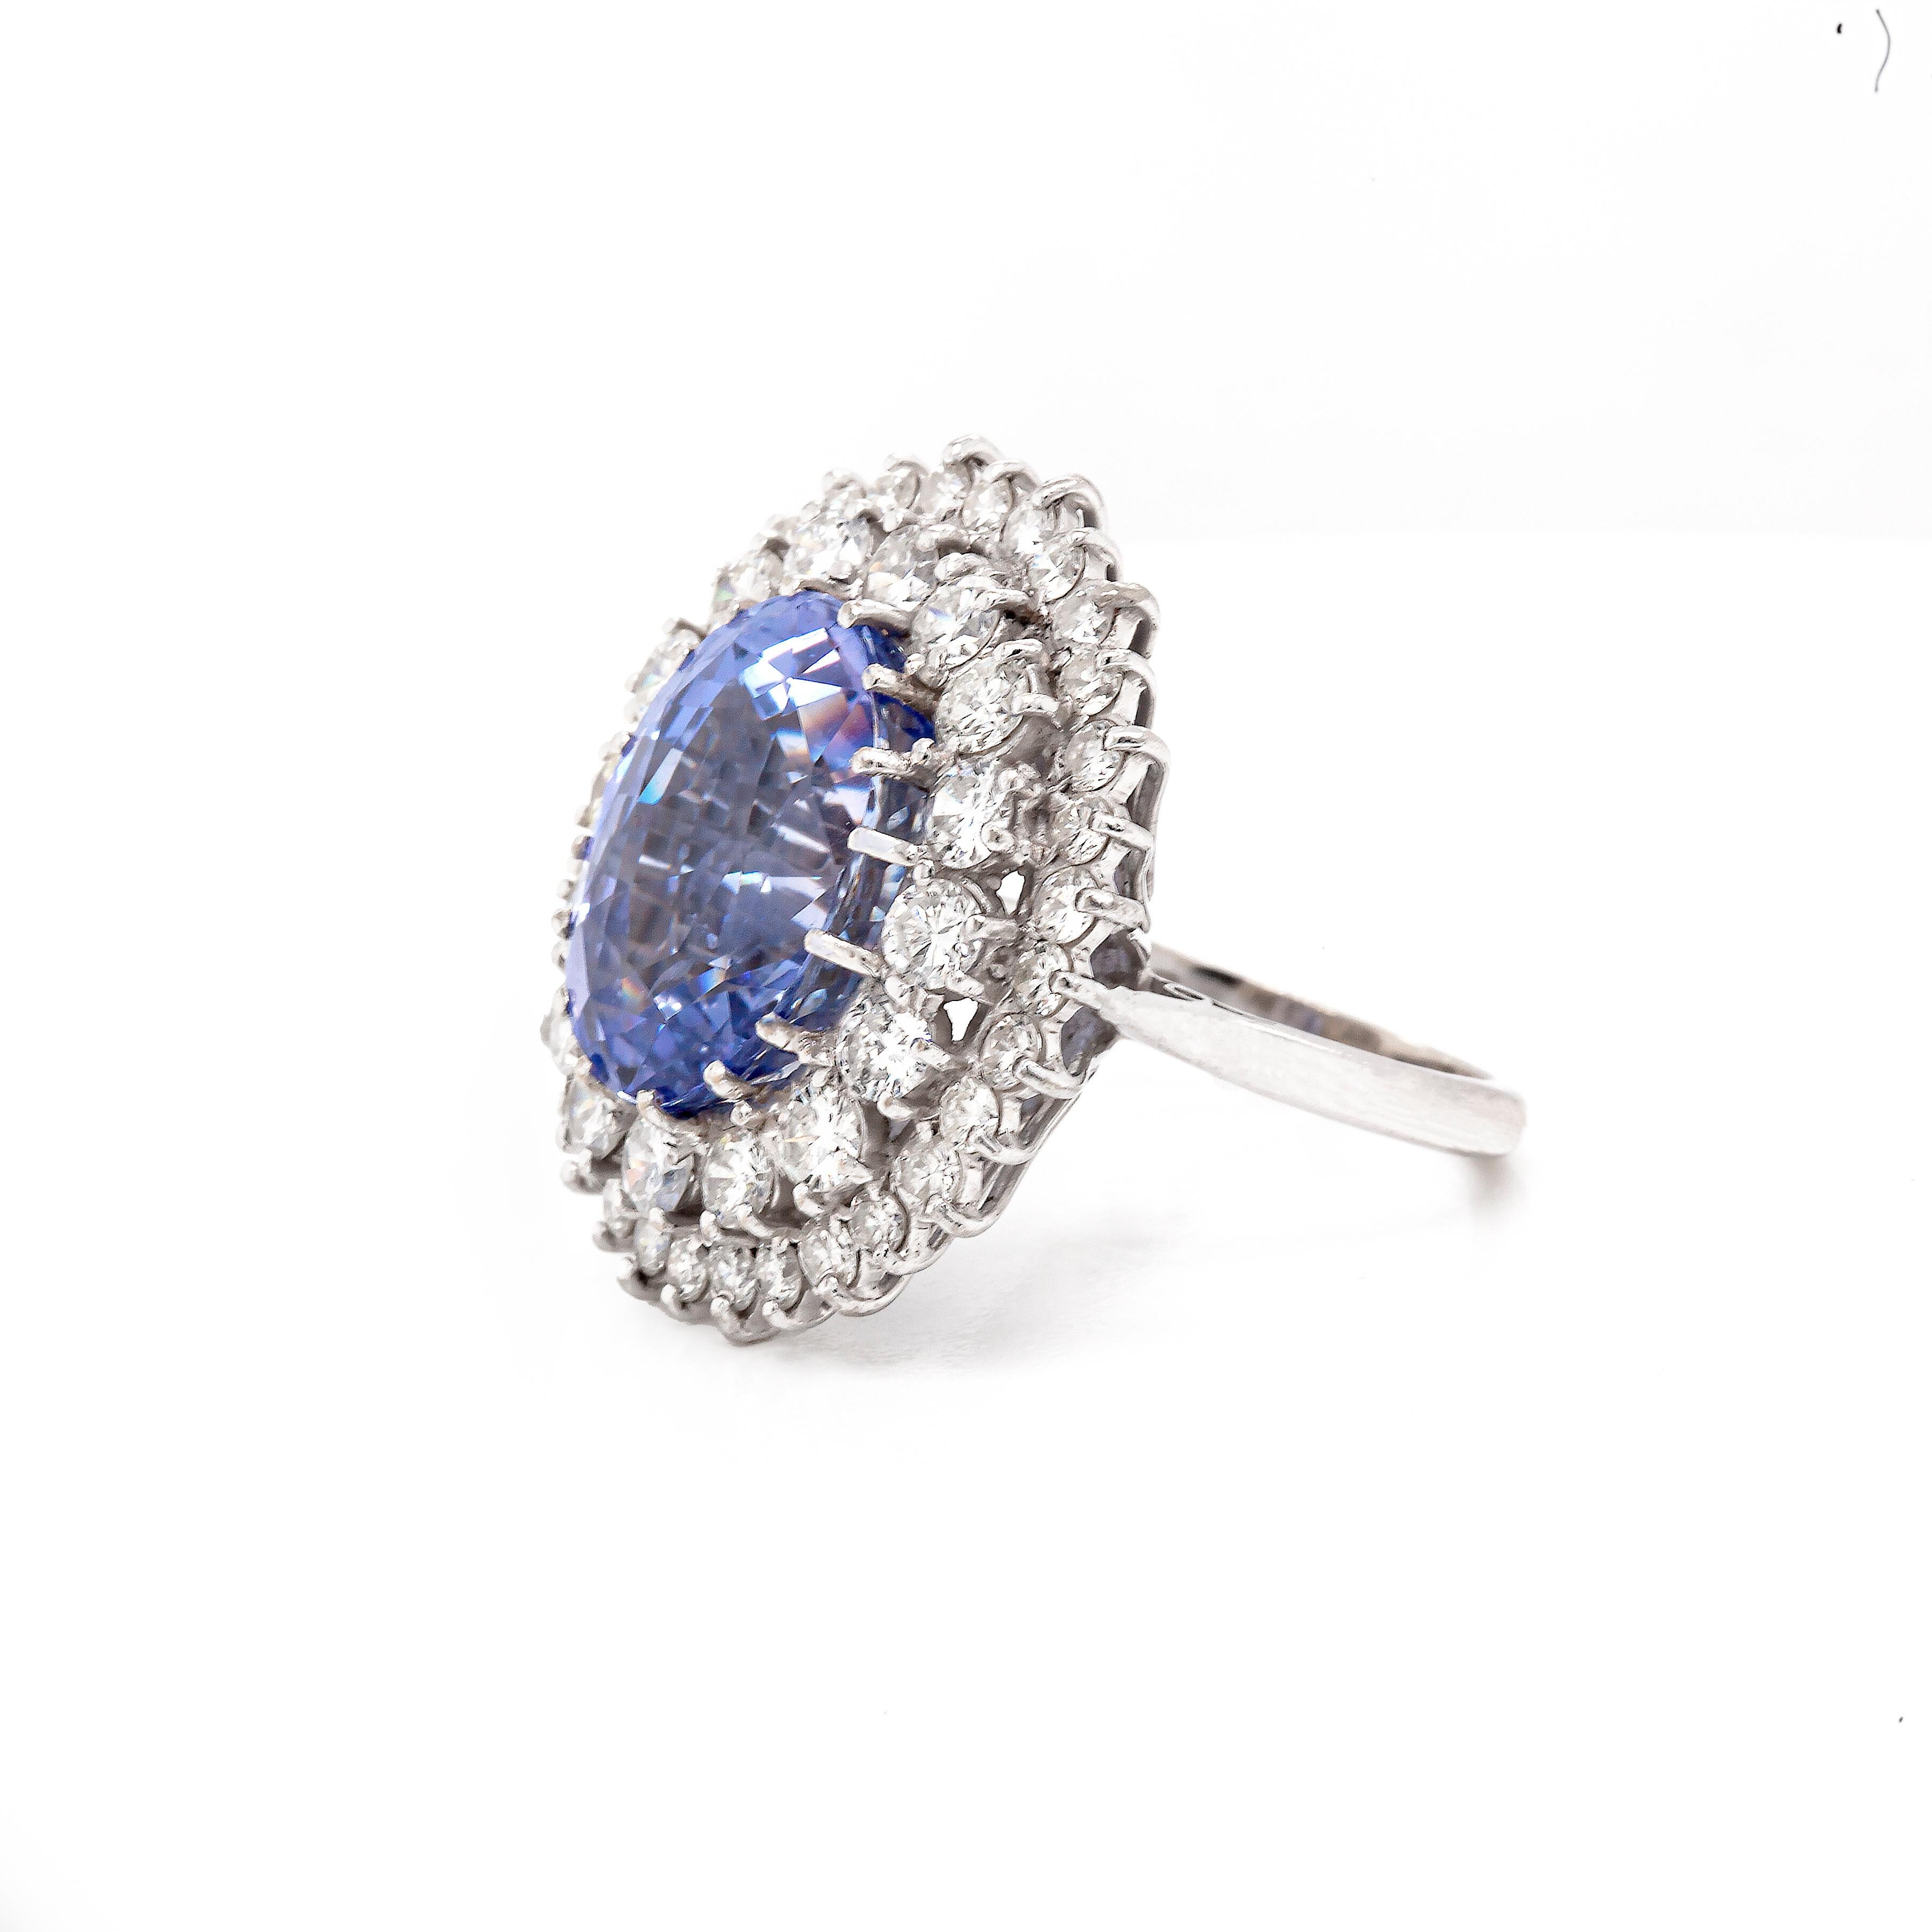 Oval Cut 17.17ct Natural Unheated Blue Colour Change Sapphire and Diamond 18ct Gold Ring For Sale